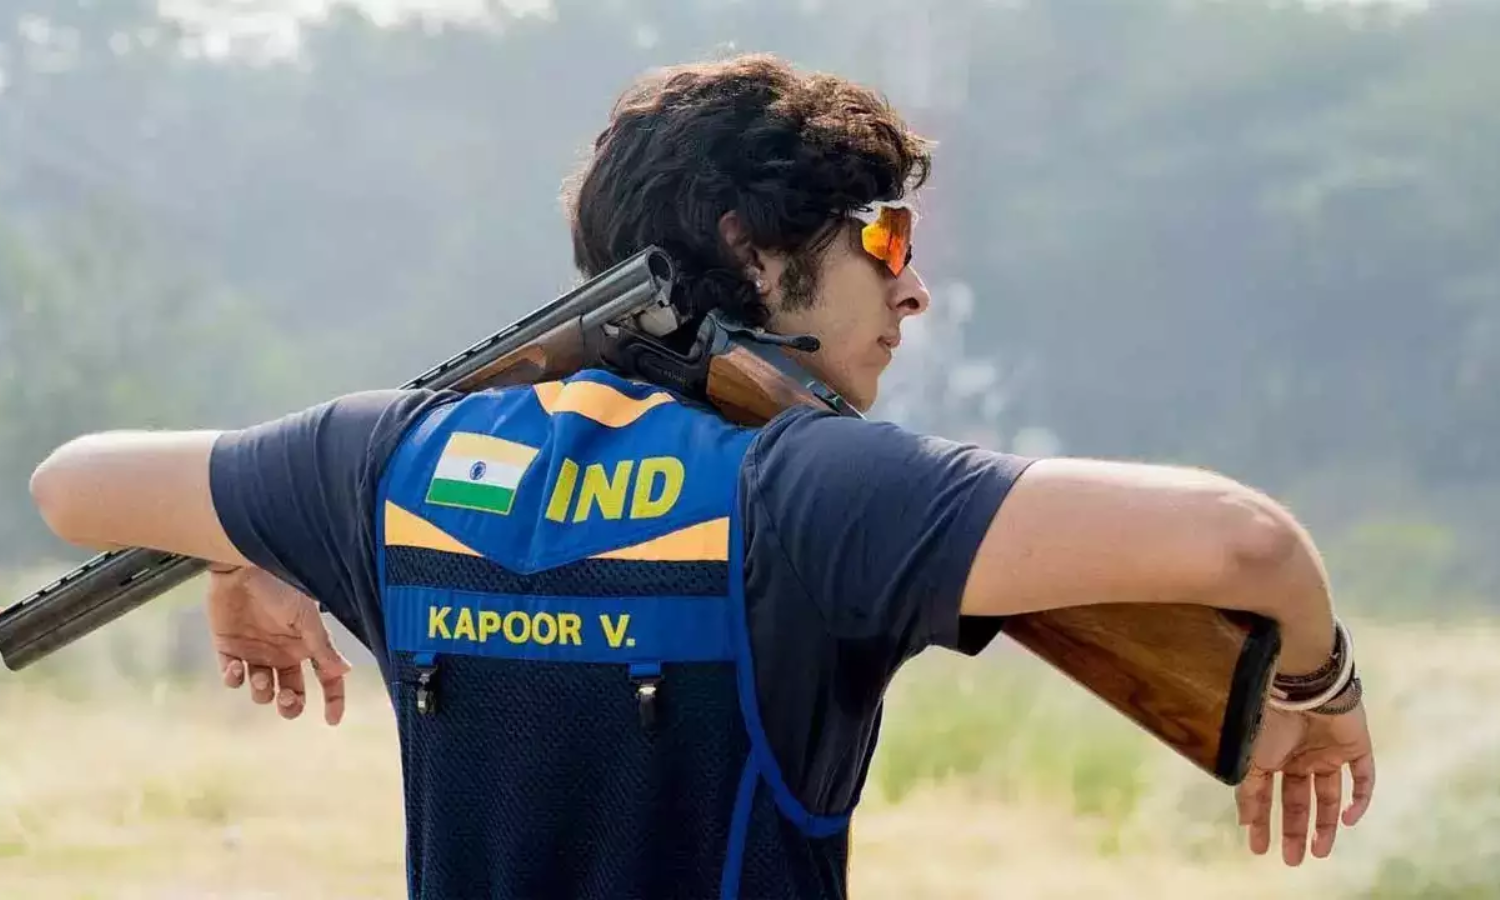 Indian Trap Shooters disappoint at Baku World Cup as Vivaan Kapoor exits in Shoot-Off